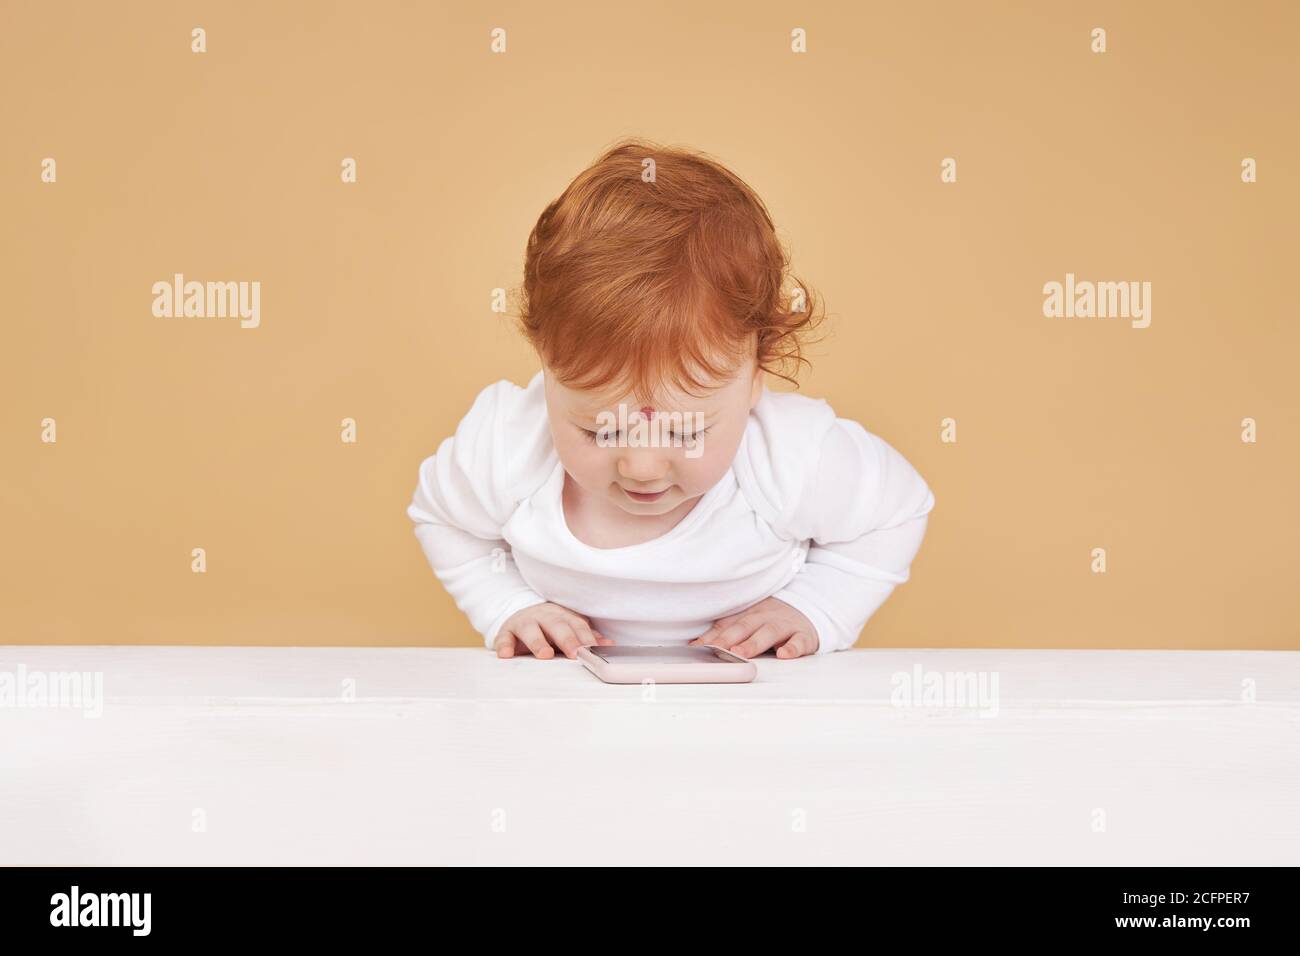 Little red-haired baby girl is playing on a beige background. Big mole on the forehead, not like everyone else Stock Photo